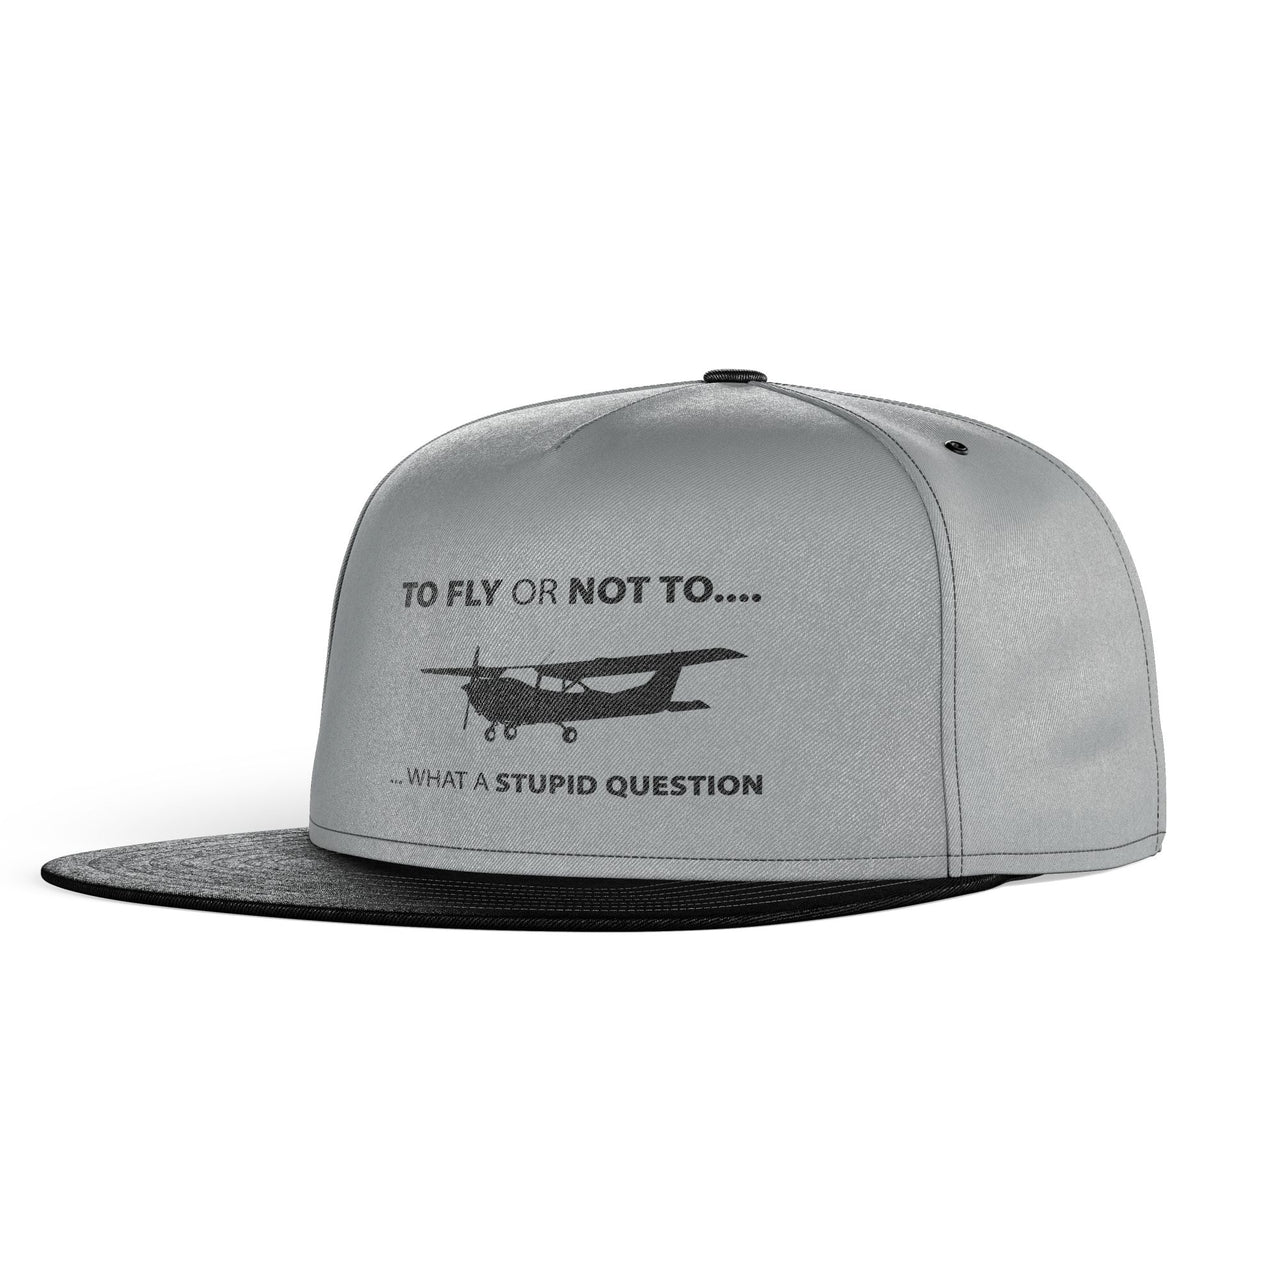 To Fly or Not To What a Stupid Question Designed Snapback Caps & Hats